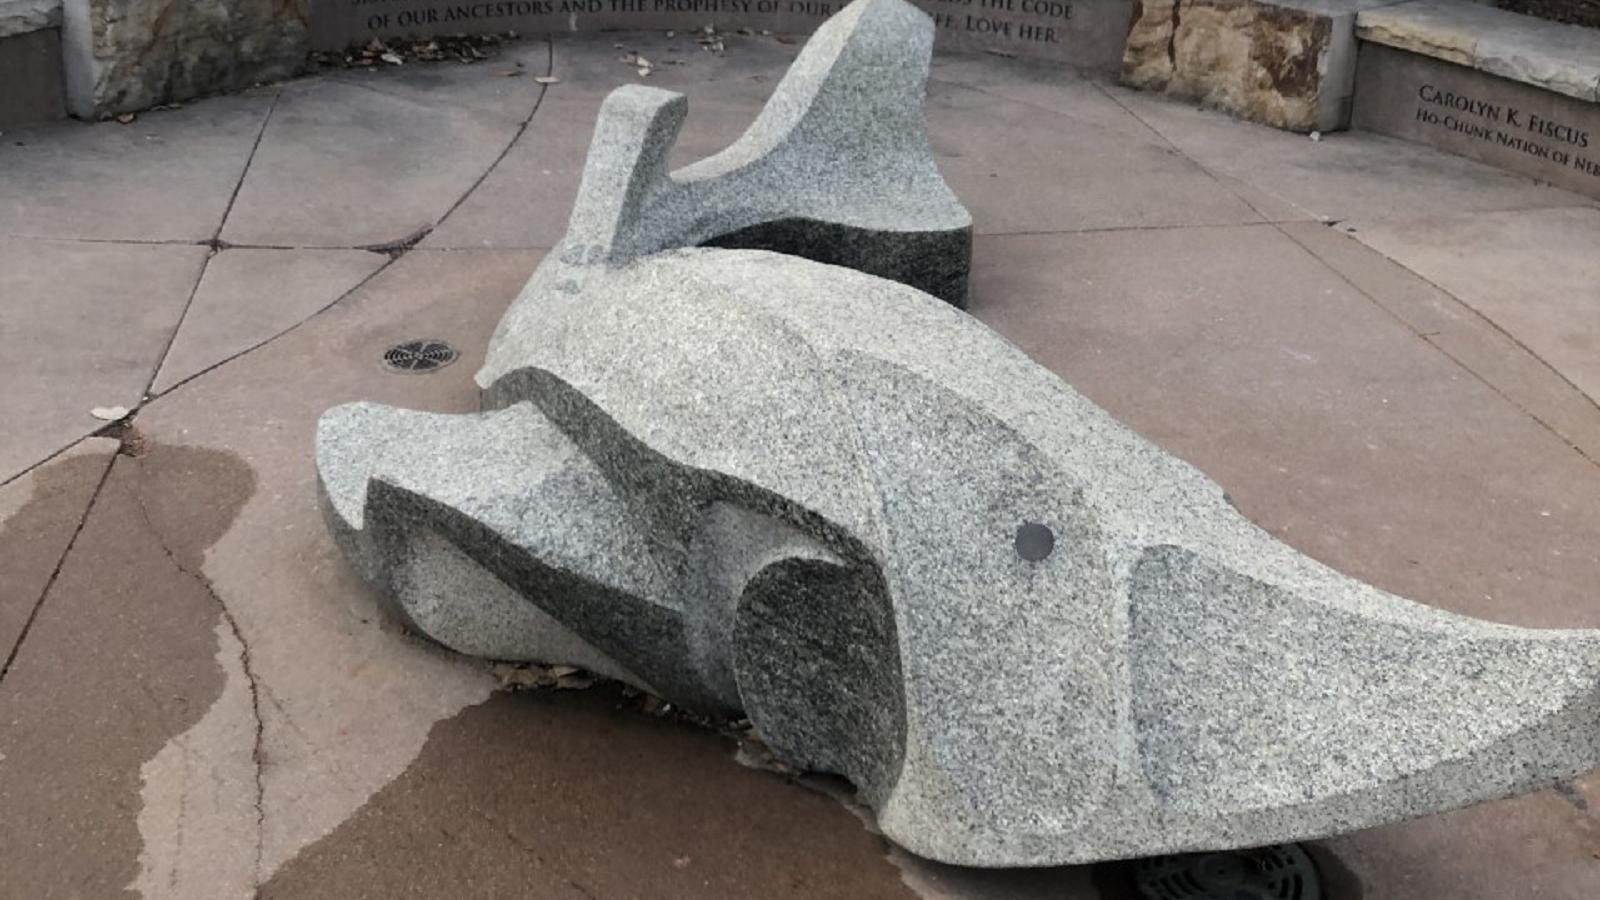 A statue of a sturgeon made of speckled tan granite lays atop a paved patio space